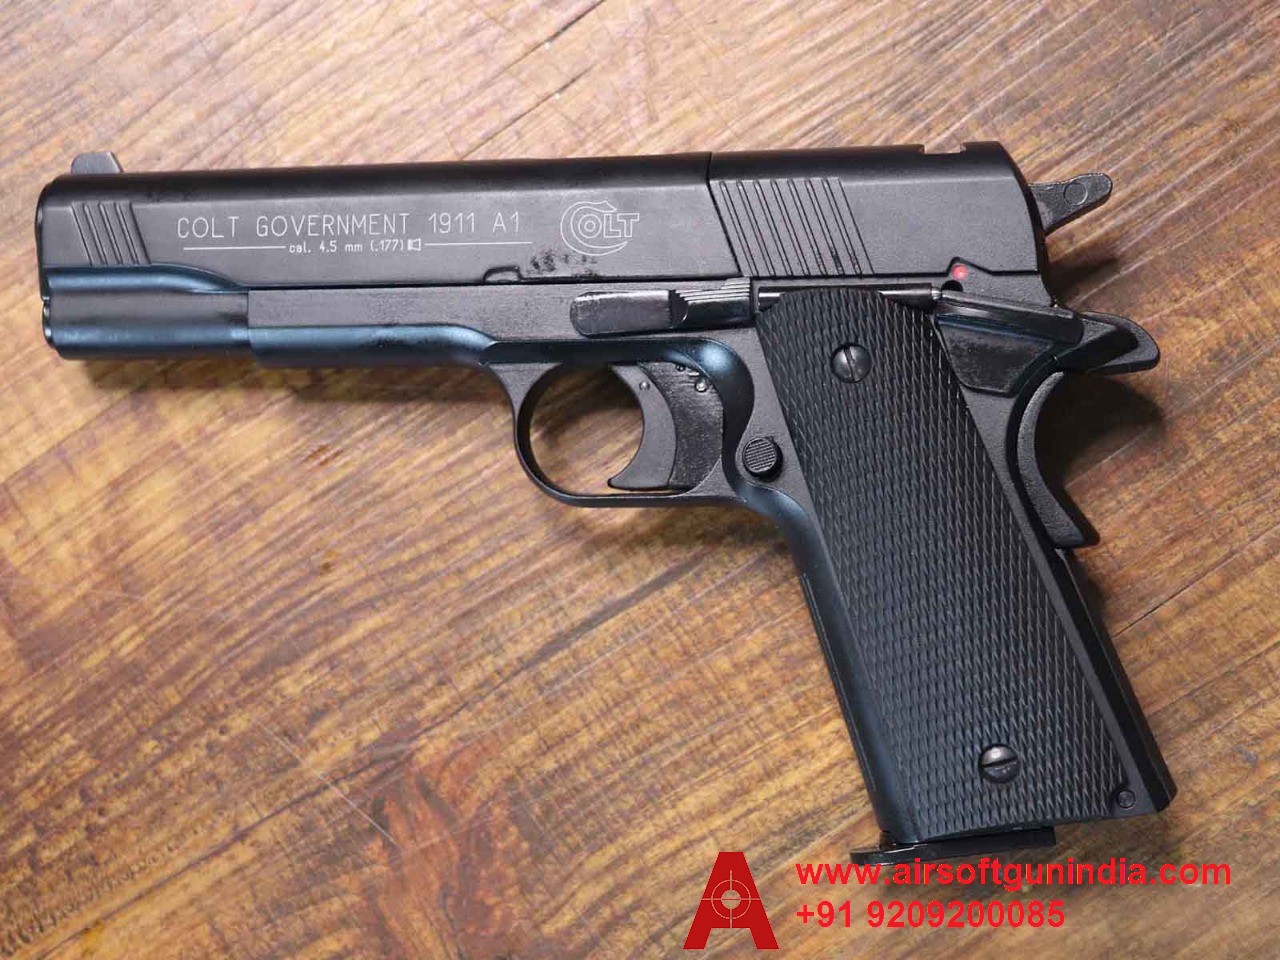 Umarex Colt Government 1911 A1 CO2 Pellets .177Cal, 4.5mm Air Pistol By Airsoft Gun India